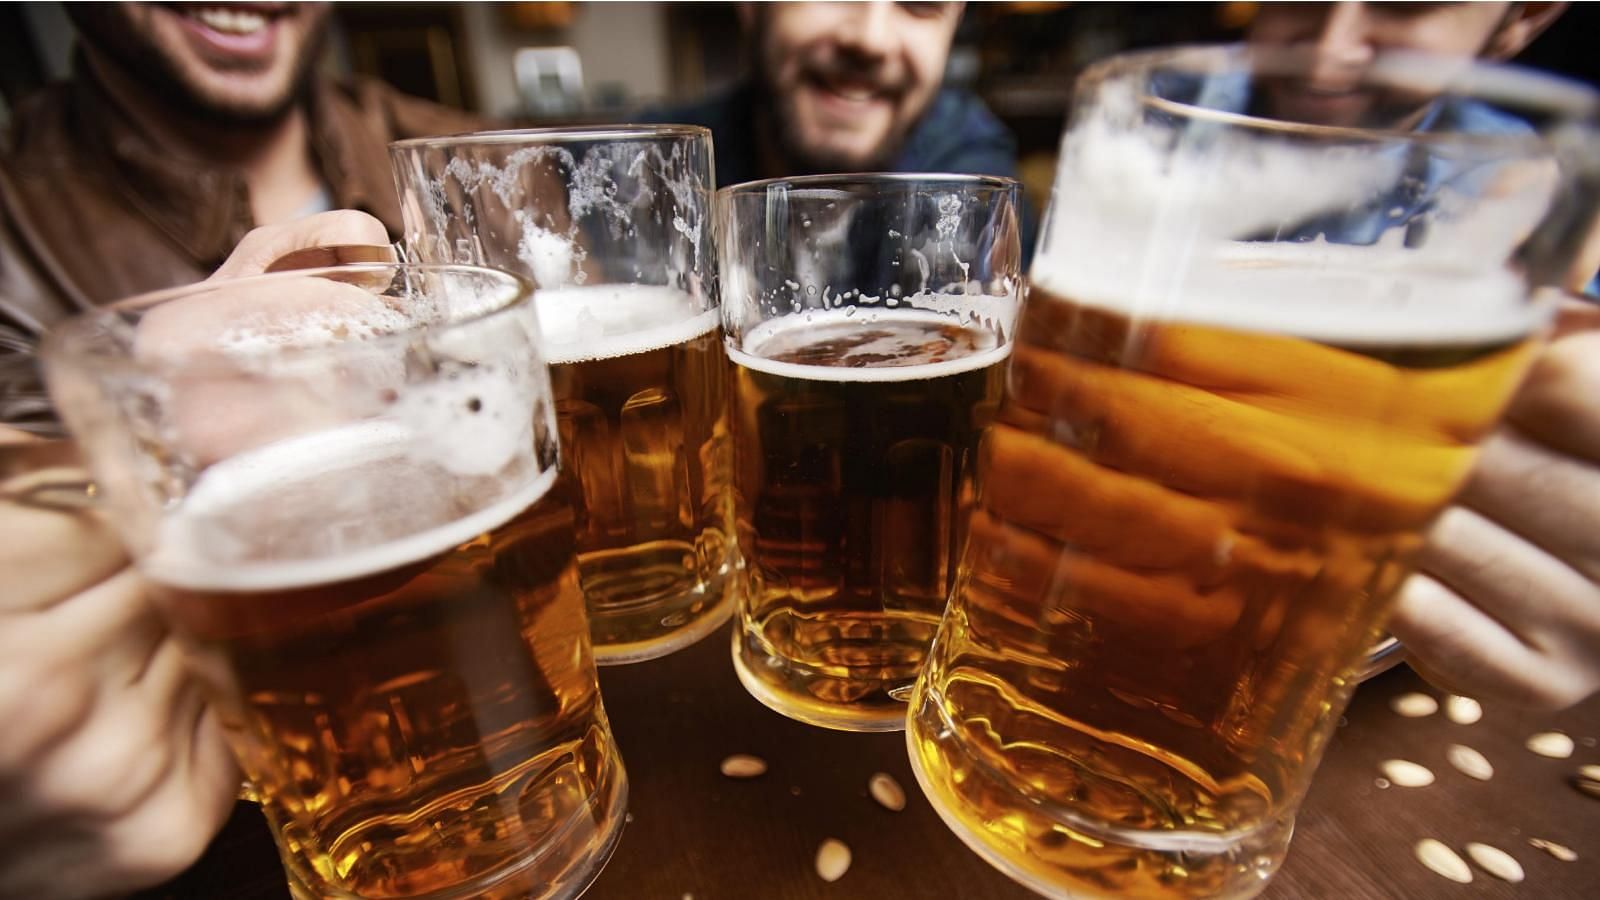 Heavy drinking can lead college students towards a vicious cycle of poor lifestyle choices.